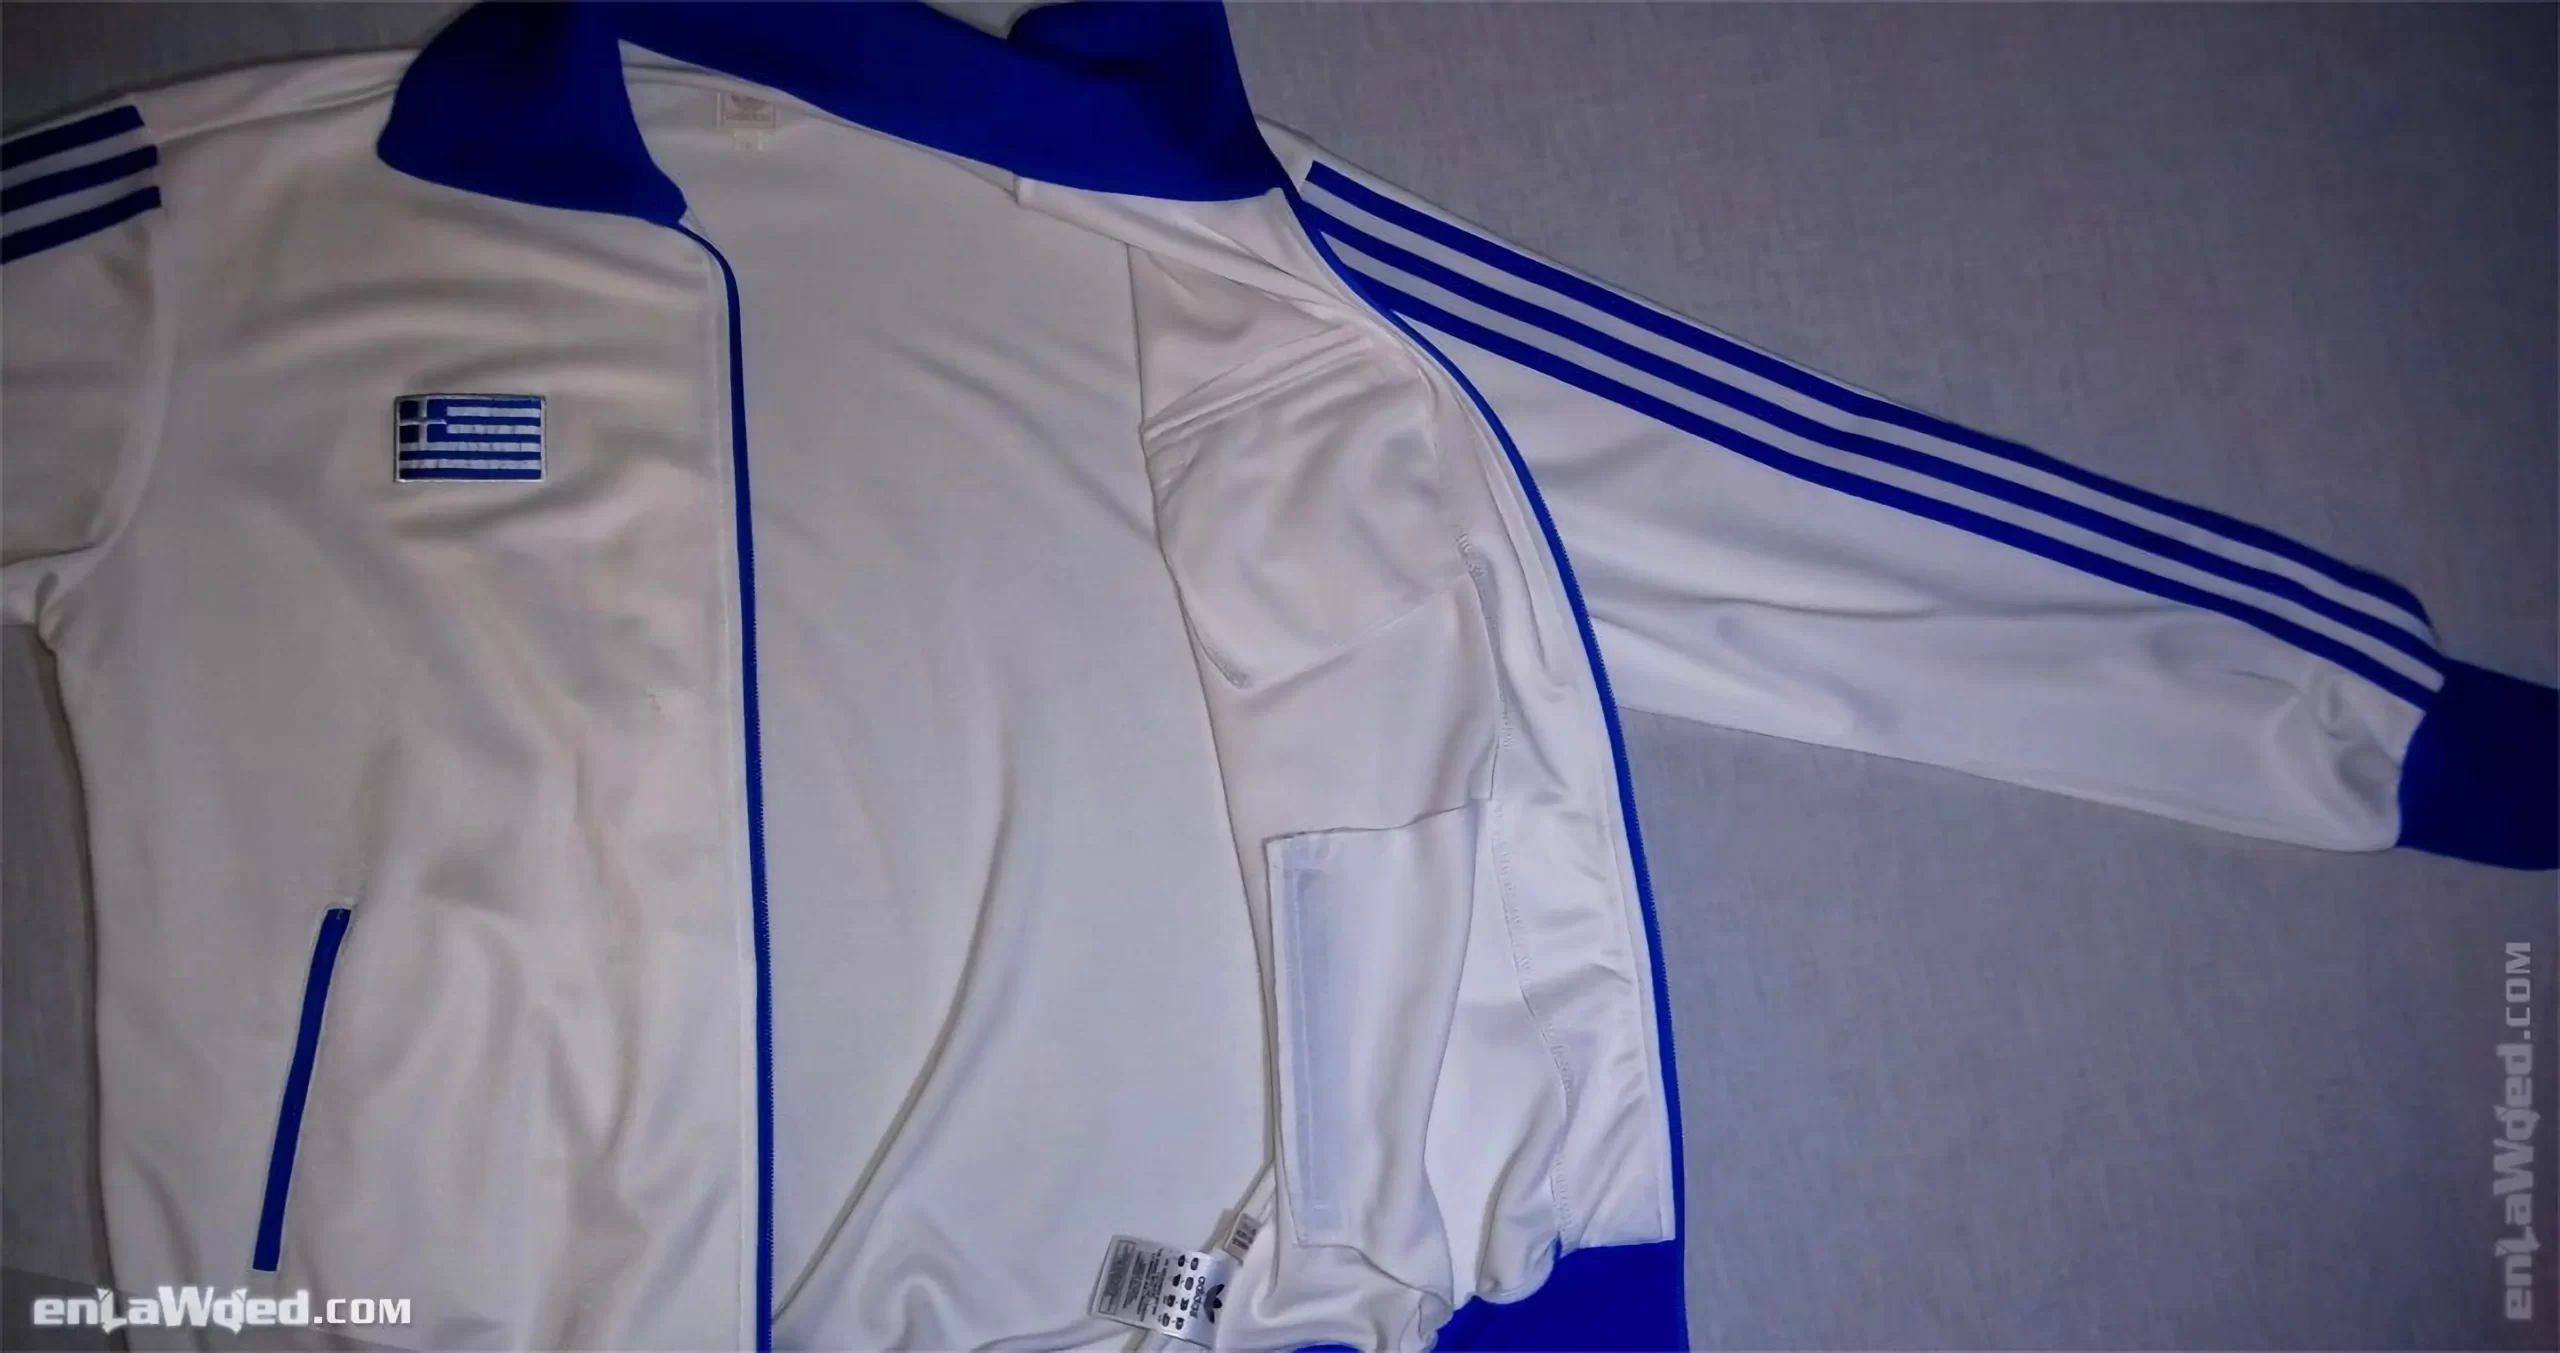 Men’s 2003 Greece Track Top by Adidas: Natural (EnLawded.com file #lmch4rqbyfesdx4jyf)